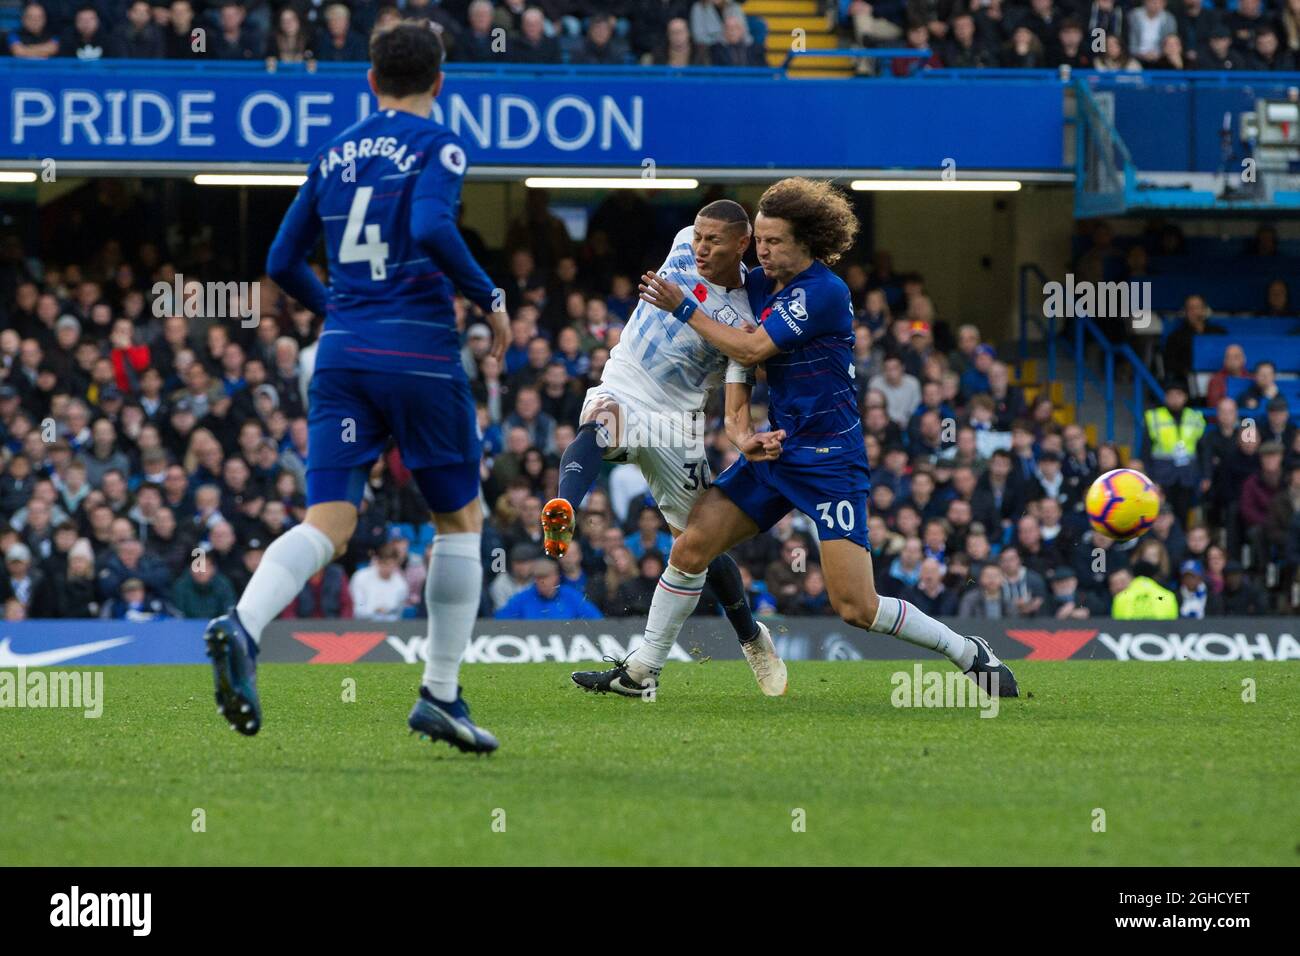 Richarlison of Everton vies for possession with David Luiz of Chelsea during the Premier League match at Stamford Bridge, London. Picture date: 11th November 2018. Picture credit should read: Craig Mercer/Sportimage via PA Images Stock Photo